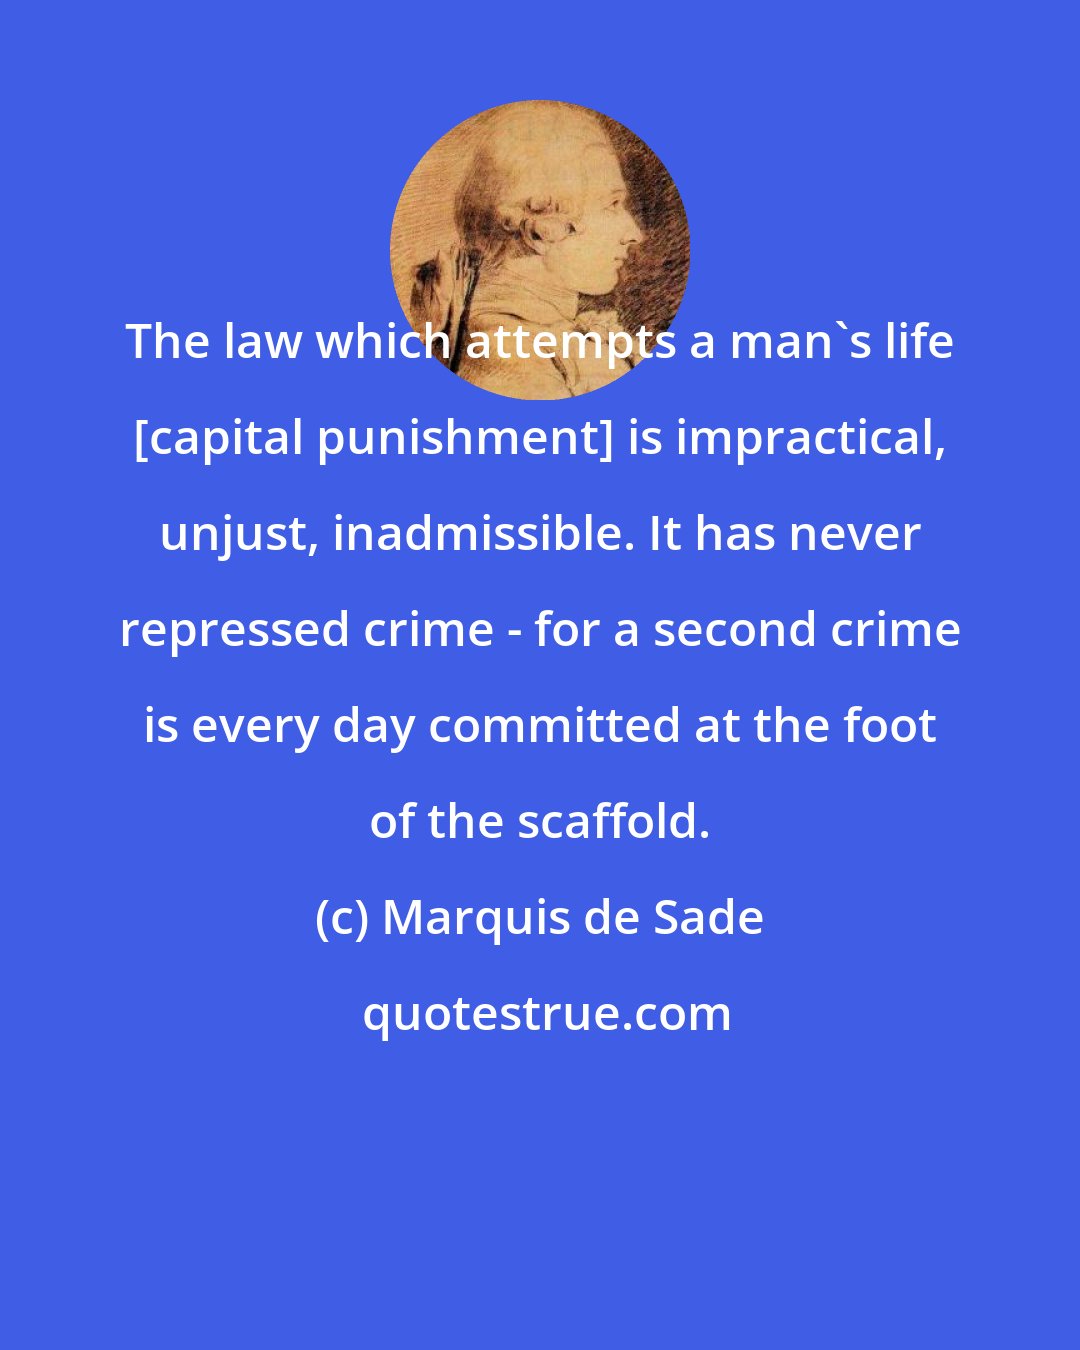 Marquis de Sade: The law which attempts a man's life [capital punishment] is impractical, unjust, inadmissible. It has never repressed crime - for a second crime is every day committed at the foot of the scaffold.